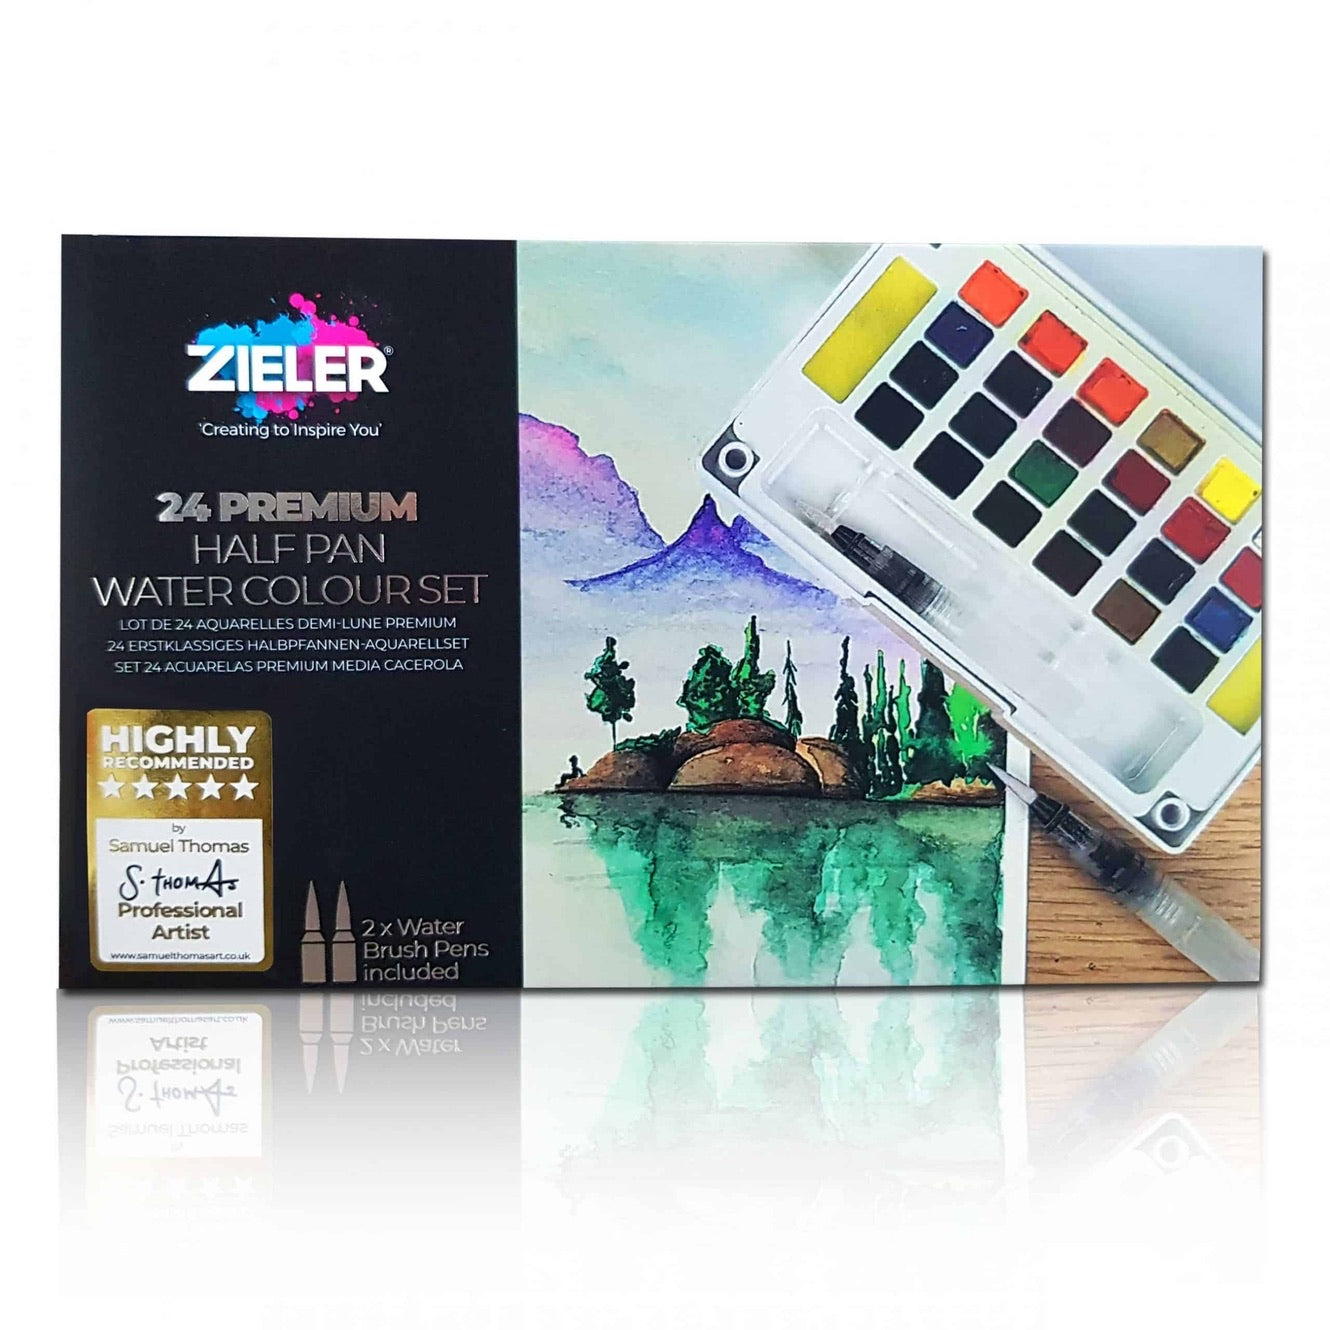 Premium 24 Half Pan Watercolour set with Detachable Palette and 2 x Watercolour Brushes – by Zieler